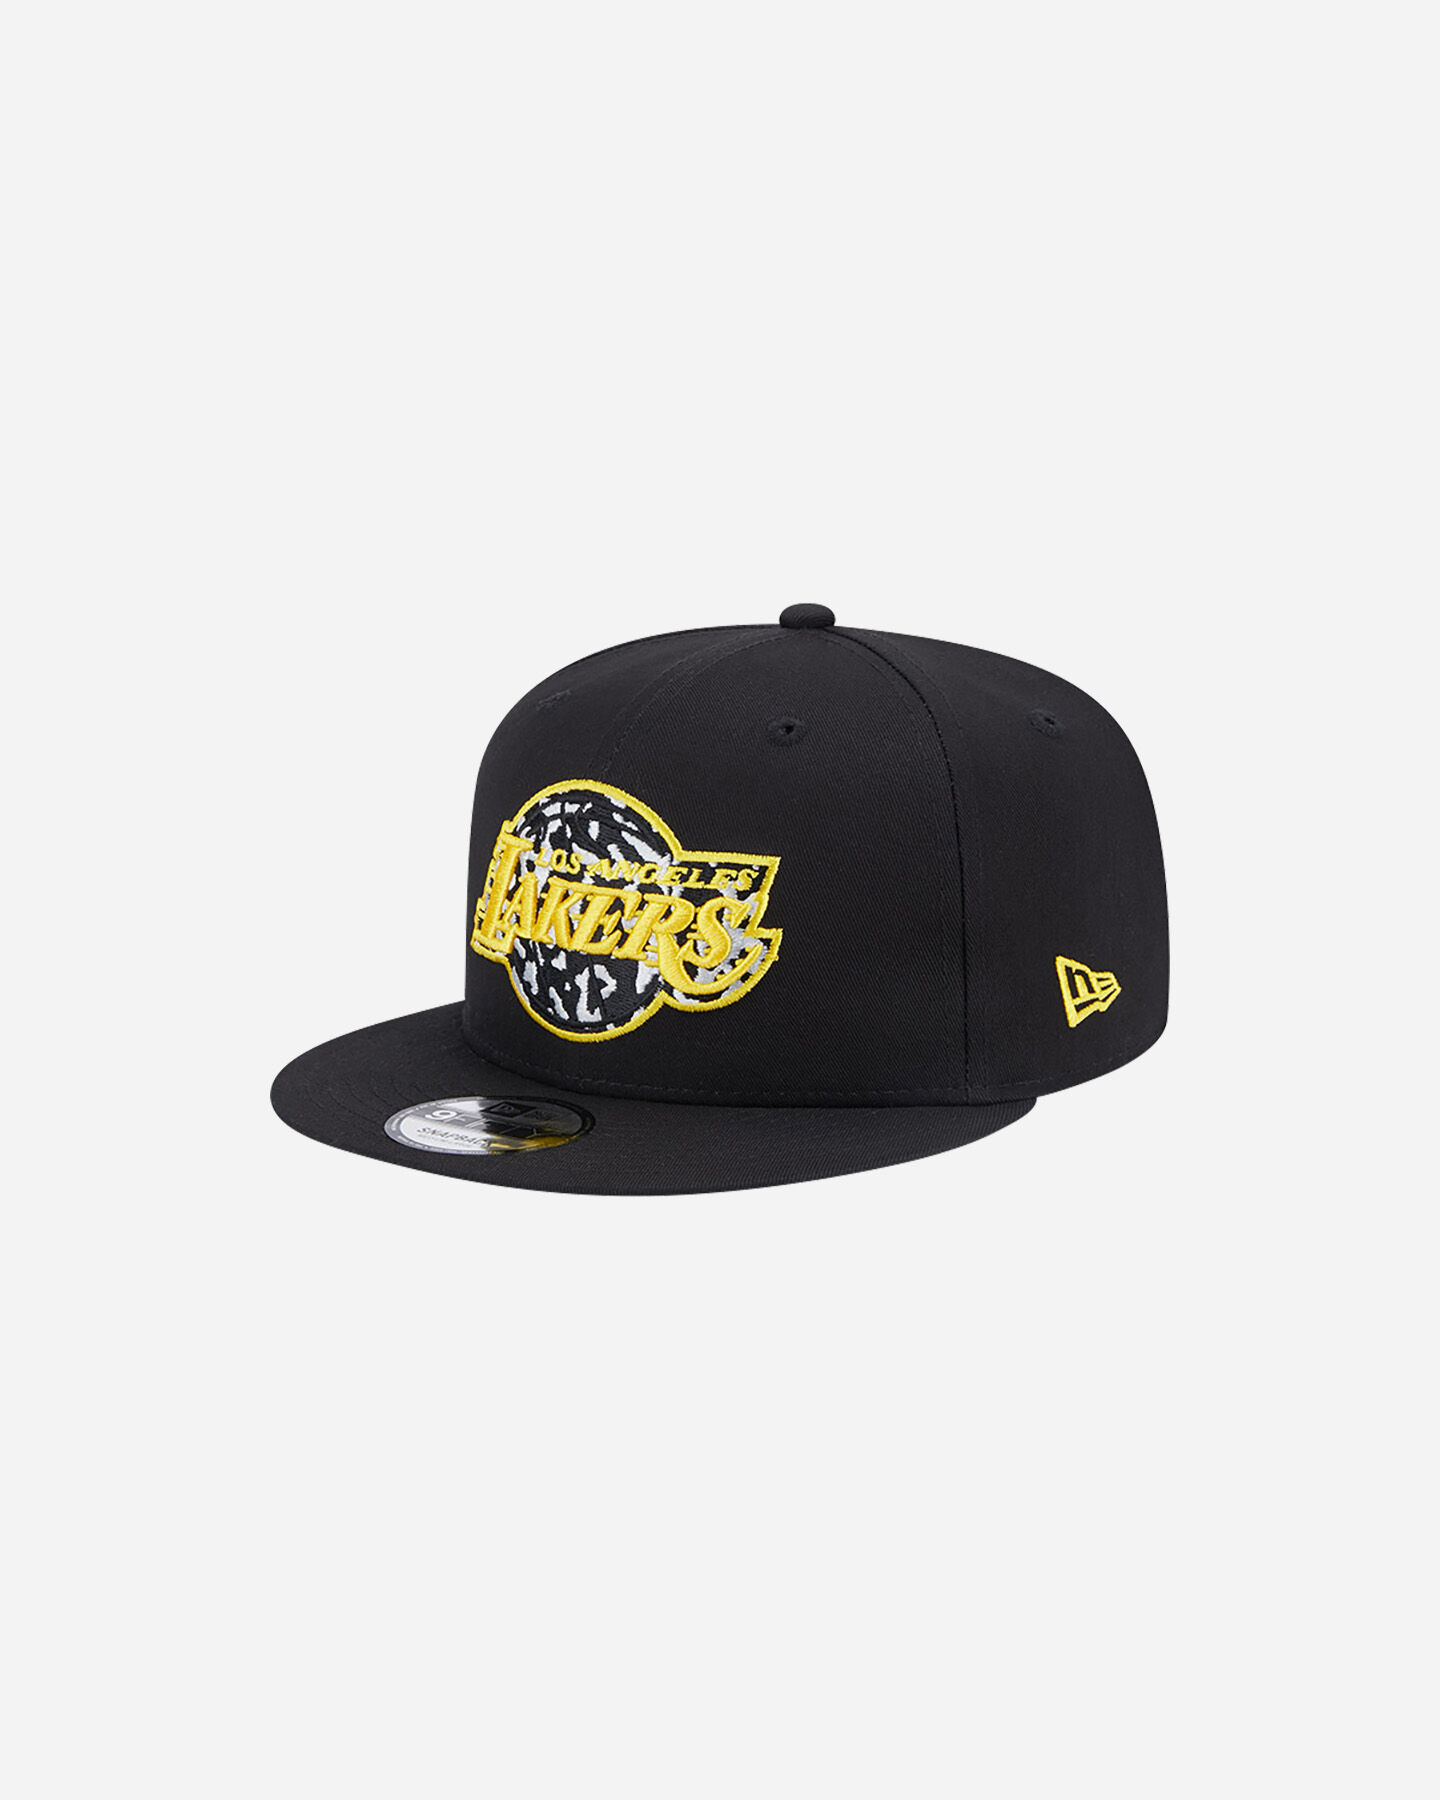  Cappellino NEW ERA 9FIFTY SEASON INFILL LOS ANGELES LAKERS  S5606191|001|SM scatto 0